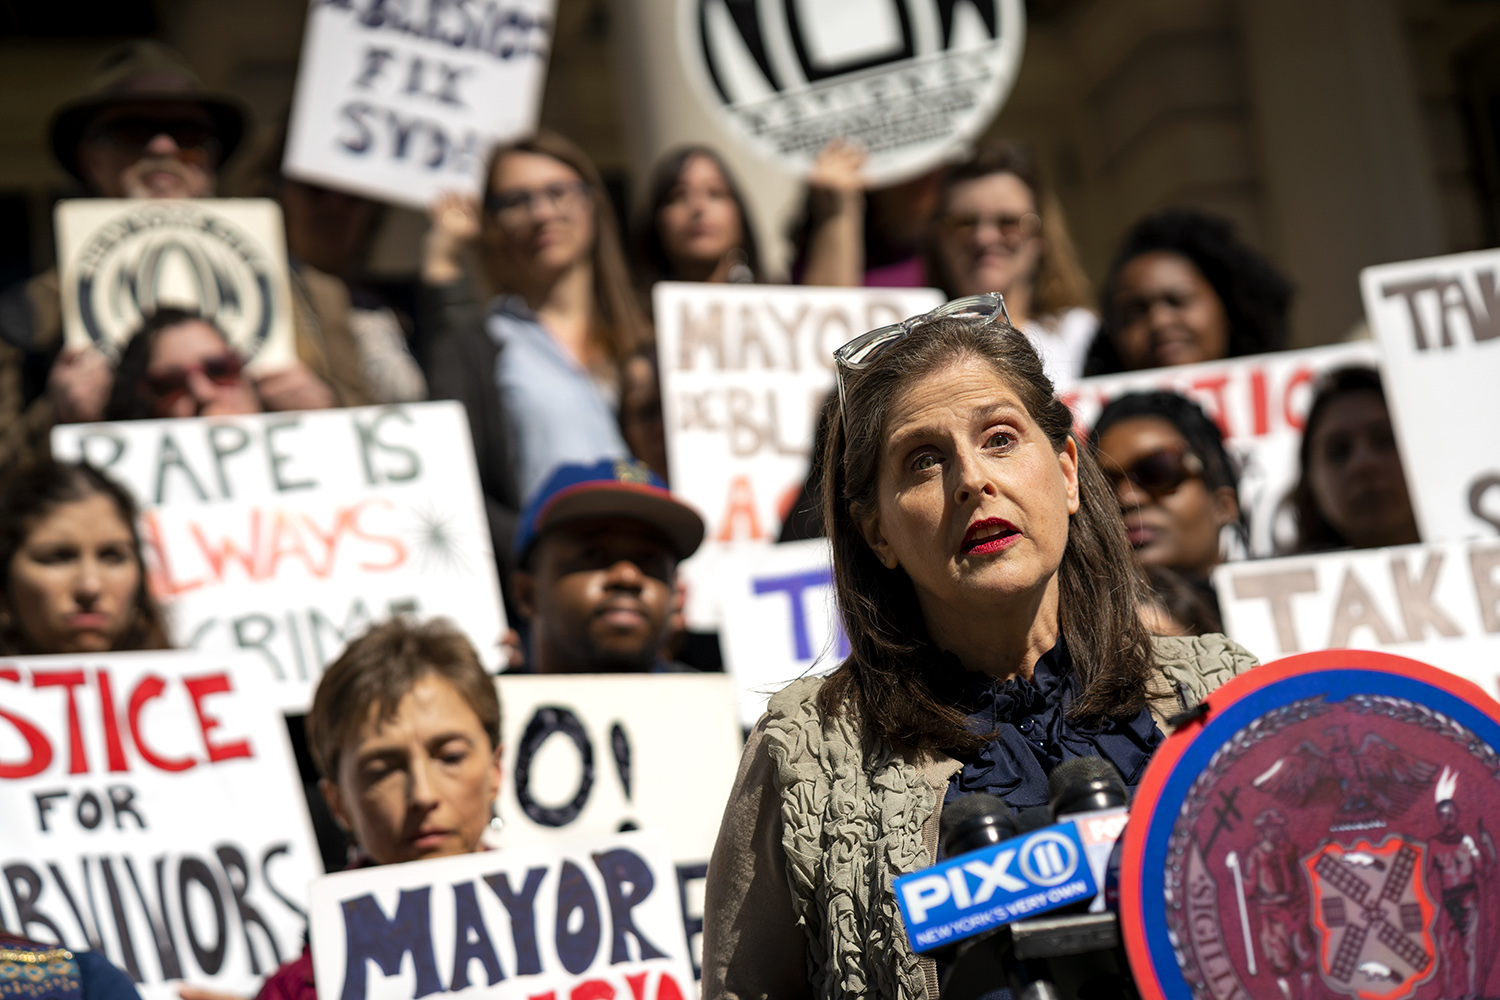 Council Member Helen Rosenthal joined sexual assault survivors and anti-rape advocates at City Hall to demand that Mayor de Blasio order NYPD Commissioner Dermot Shea to remedy under-prioritizing of the NYPD’s Special Victims Division. Photo by Tsubasa Berg